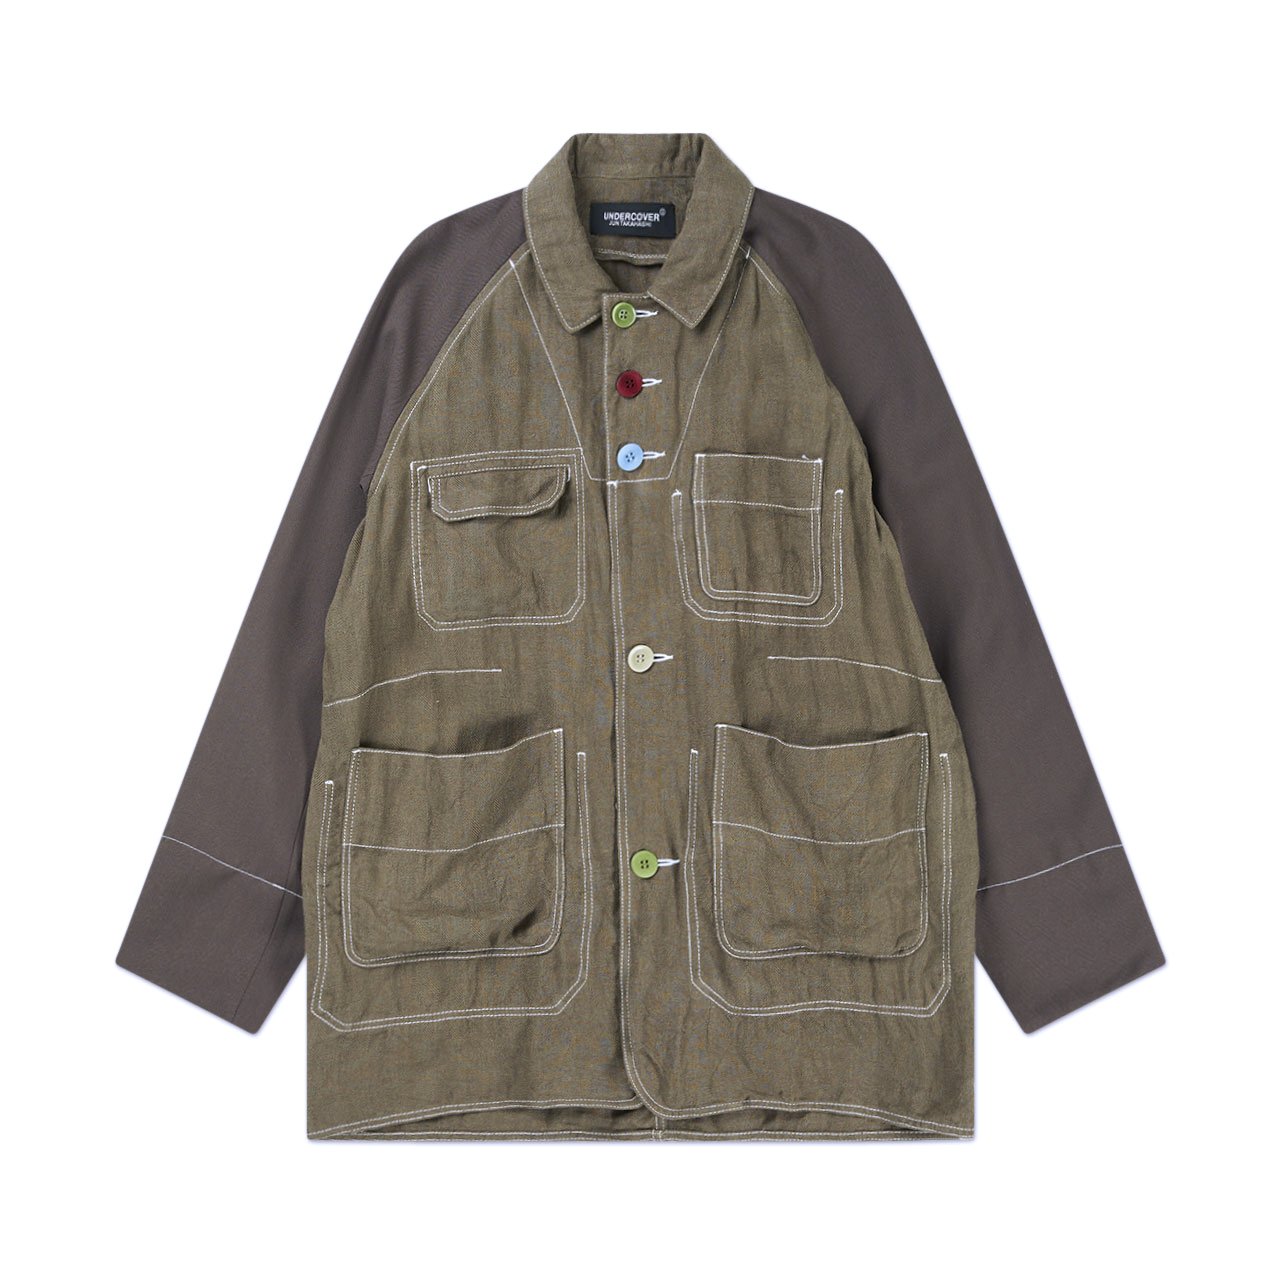 undercover two-tone jacket (khaki / brown) UC1A4201 - a.plus